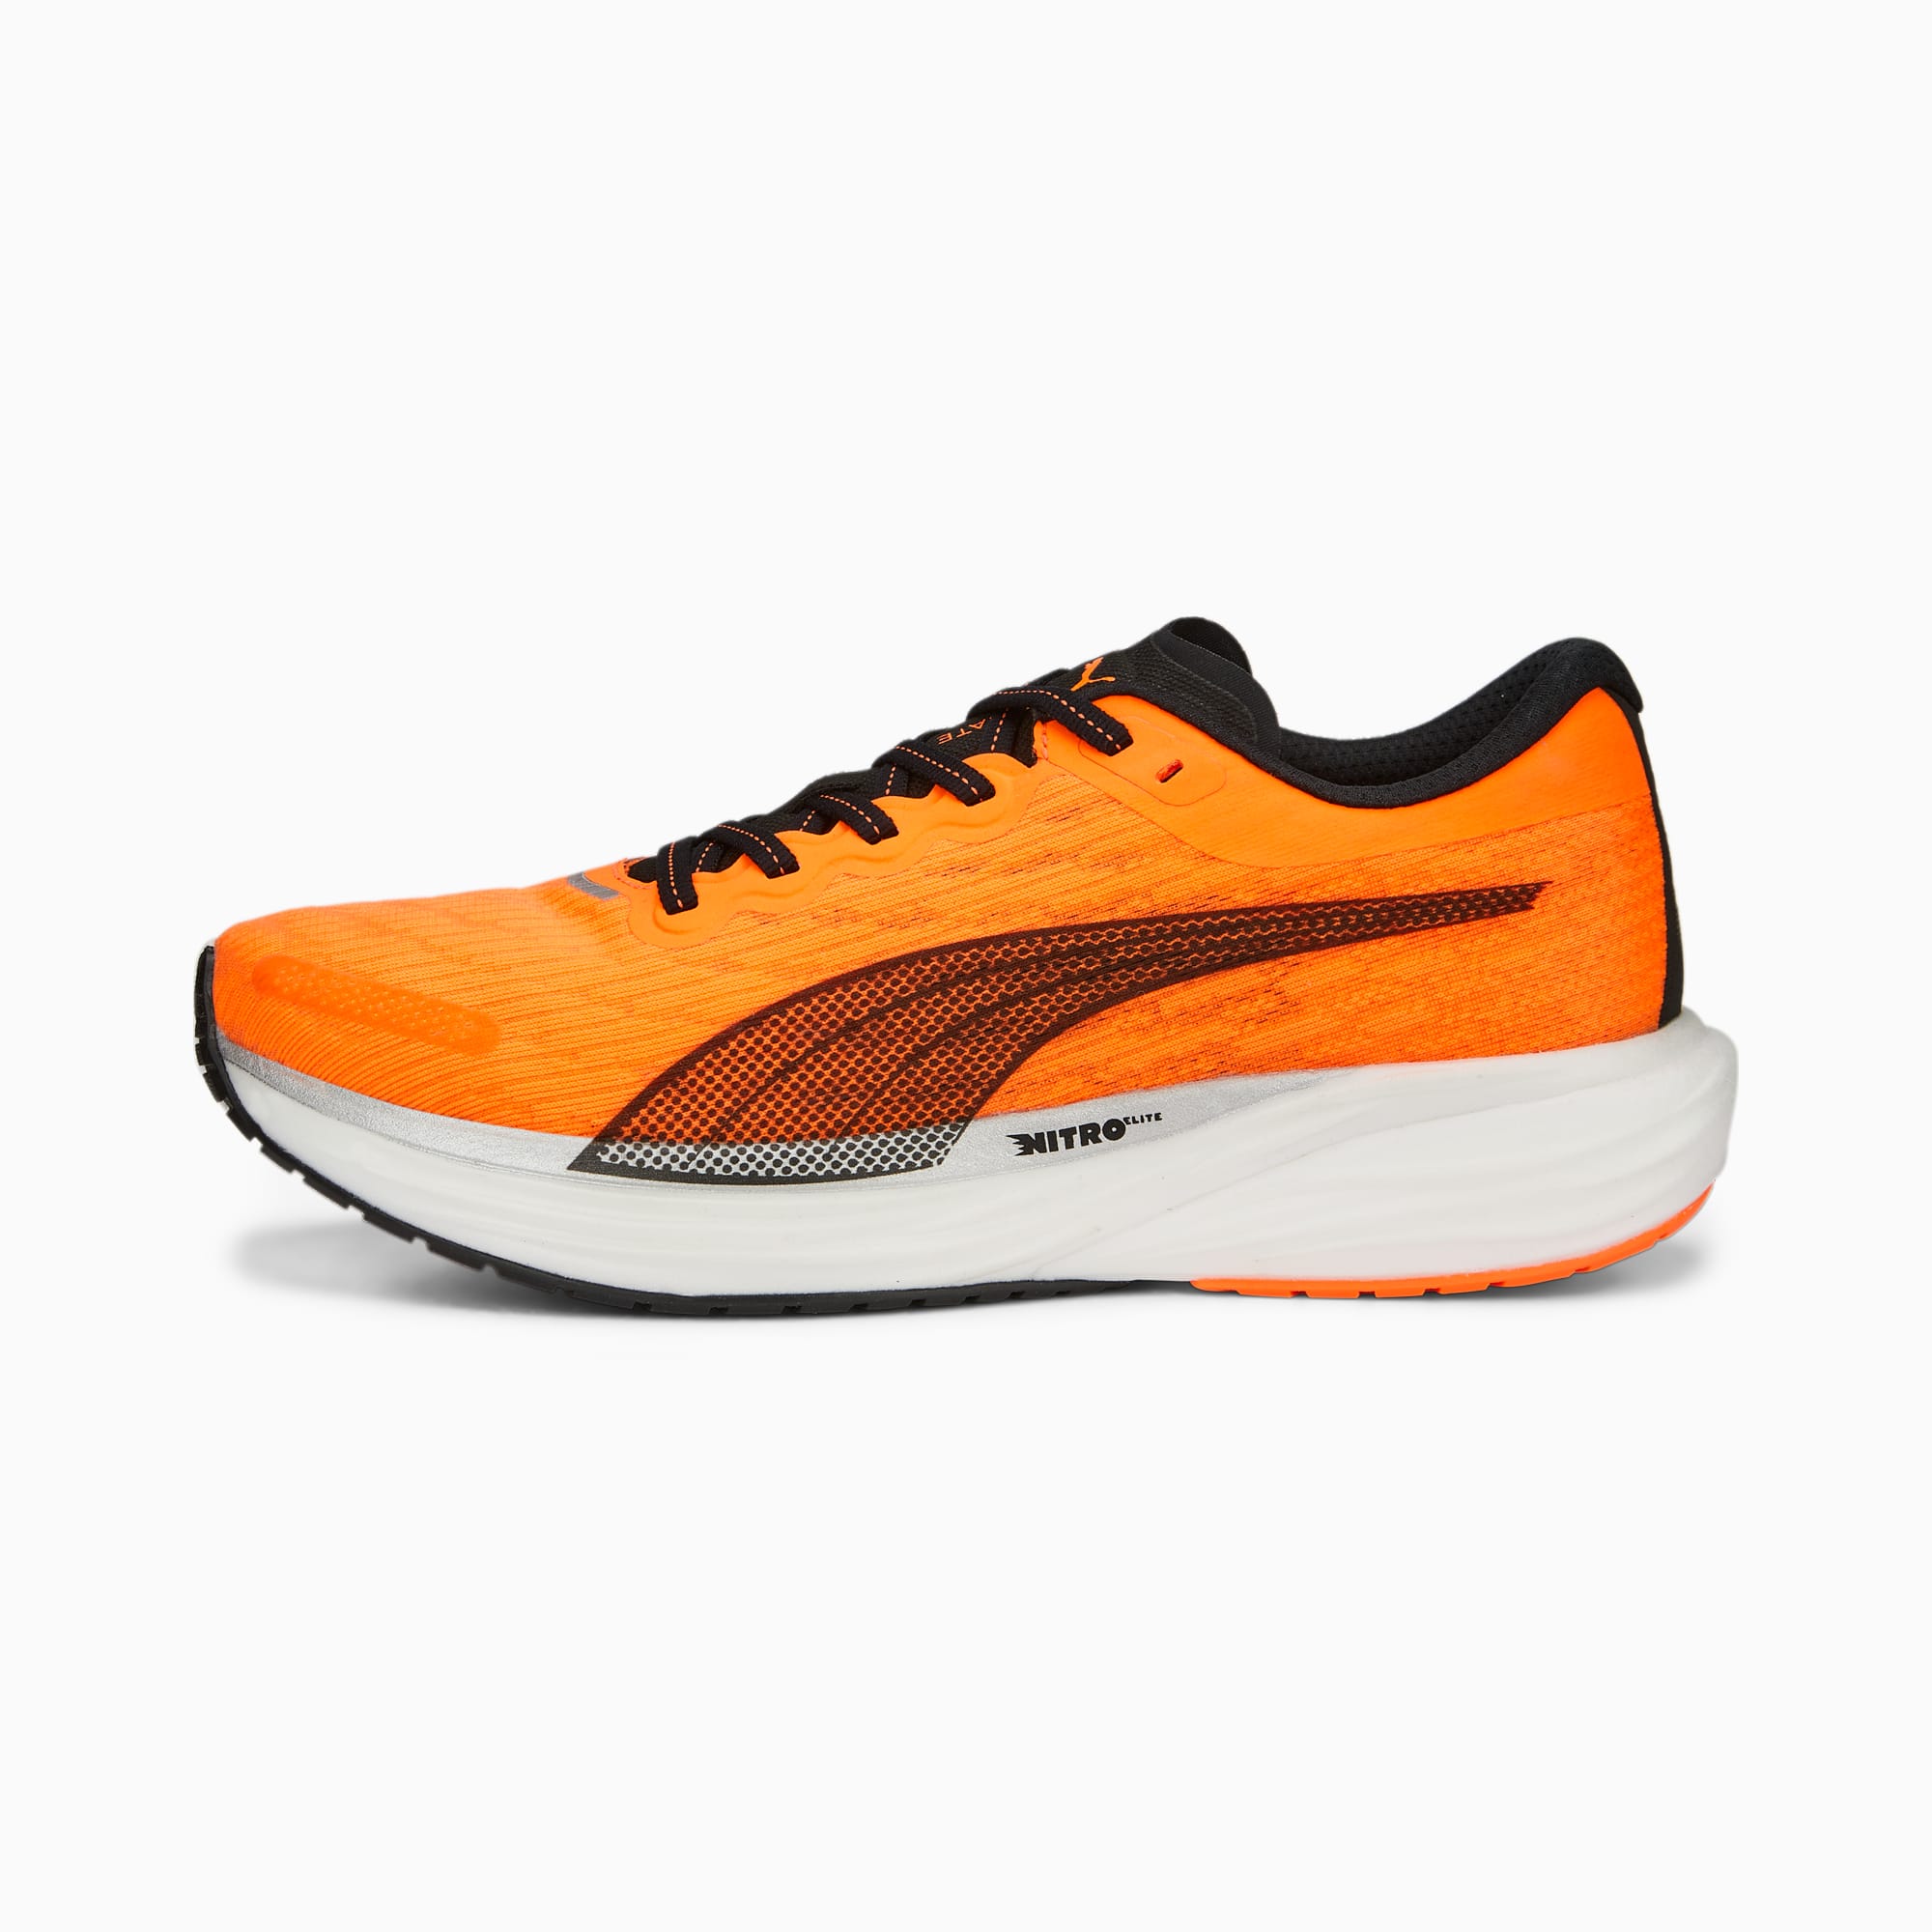 Petition Four candidate Deviate NITRO 2 Men's Running Shoes | PUMA